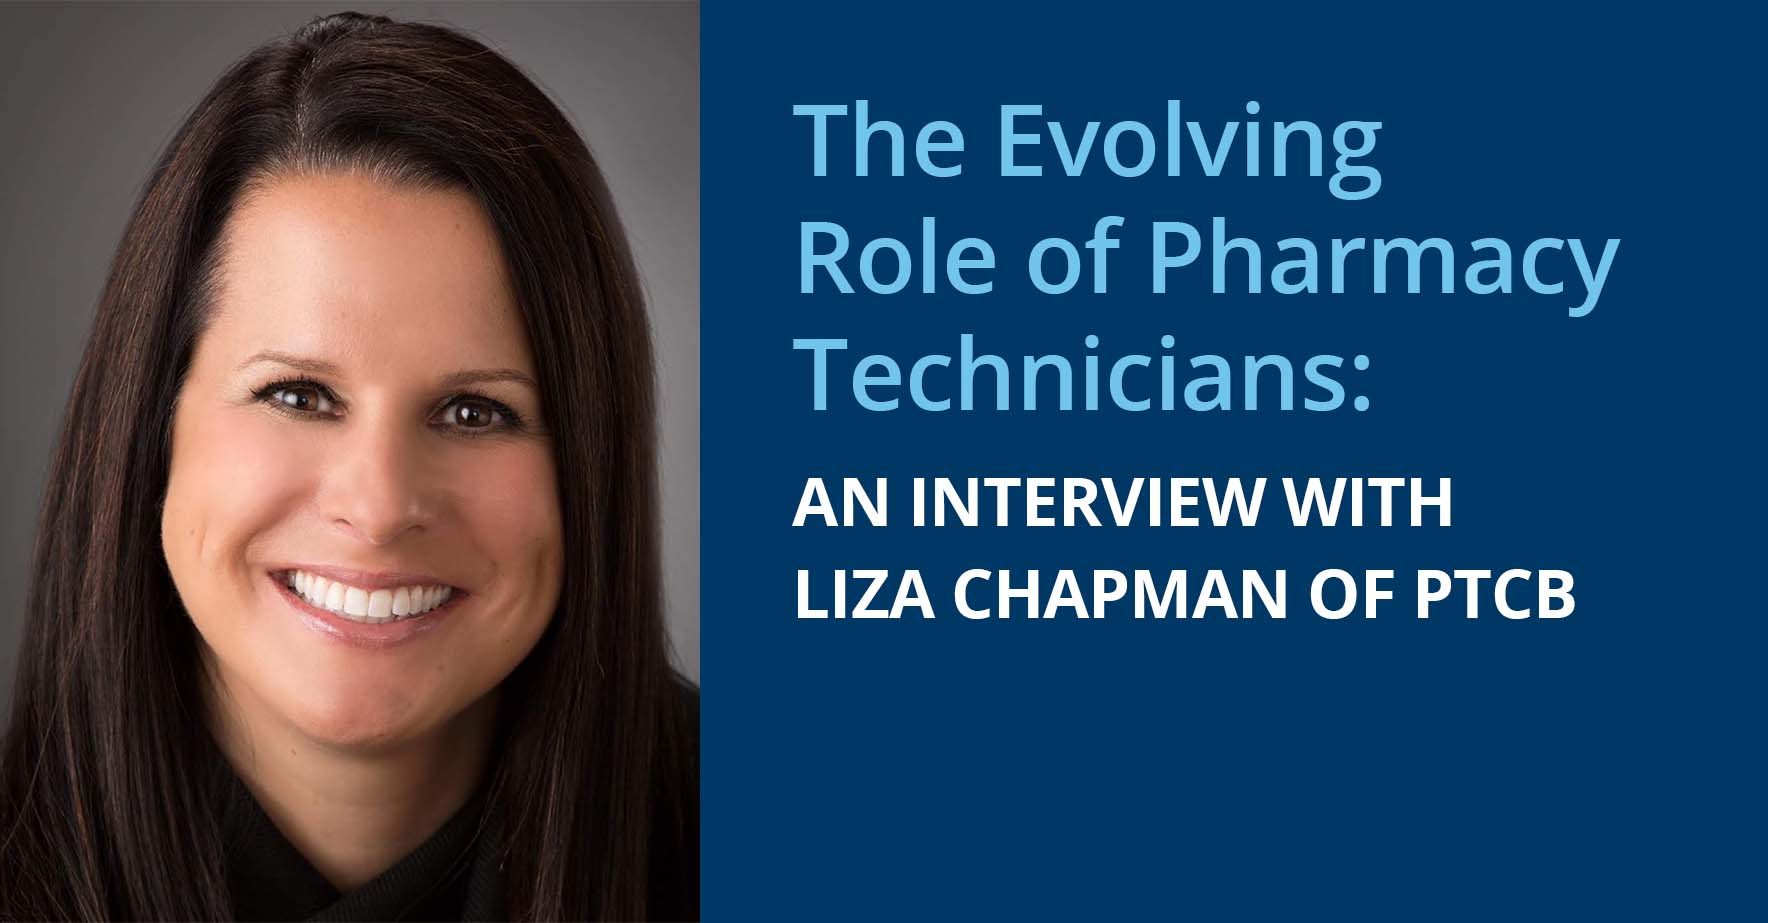 the_evolving_role_of_pharmacy_technicians_an_interview_with_with_liza_chapman_chapman_of_ptcb.jpg